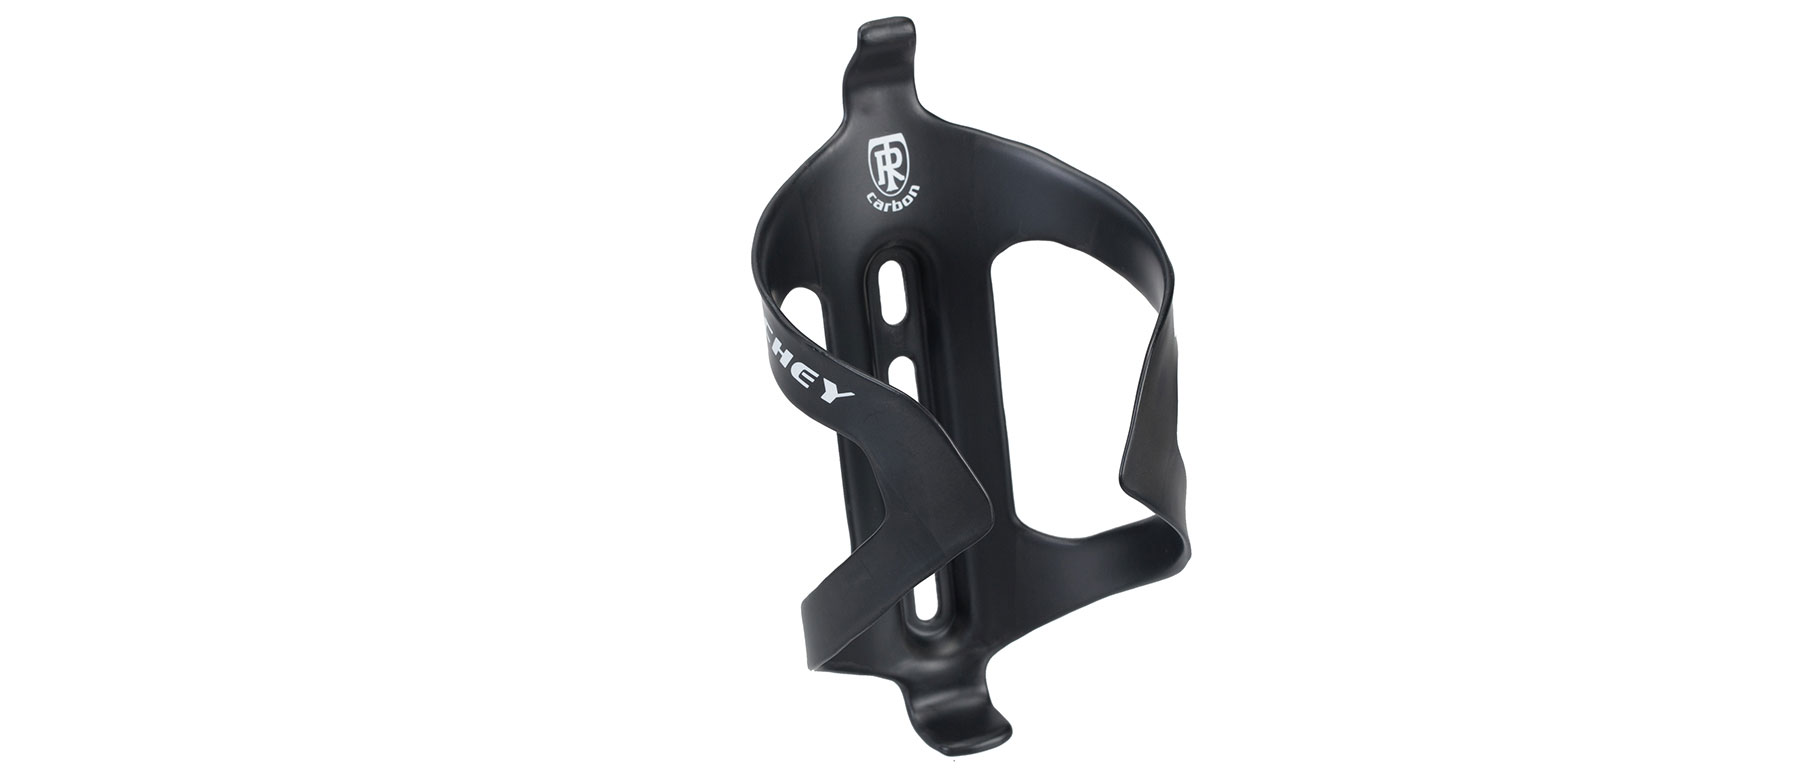 Ritchey WCS Carbon Bottle Cage